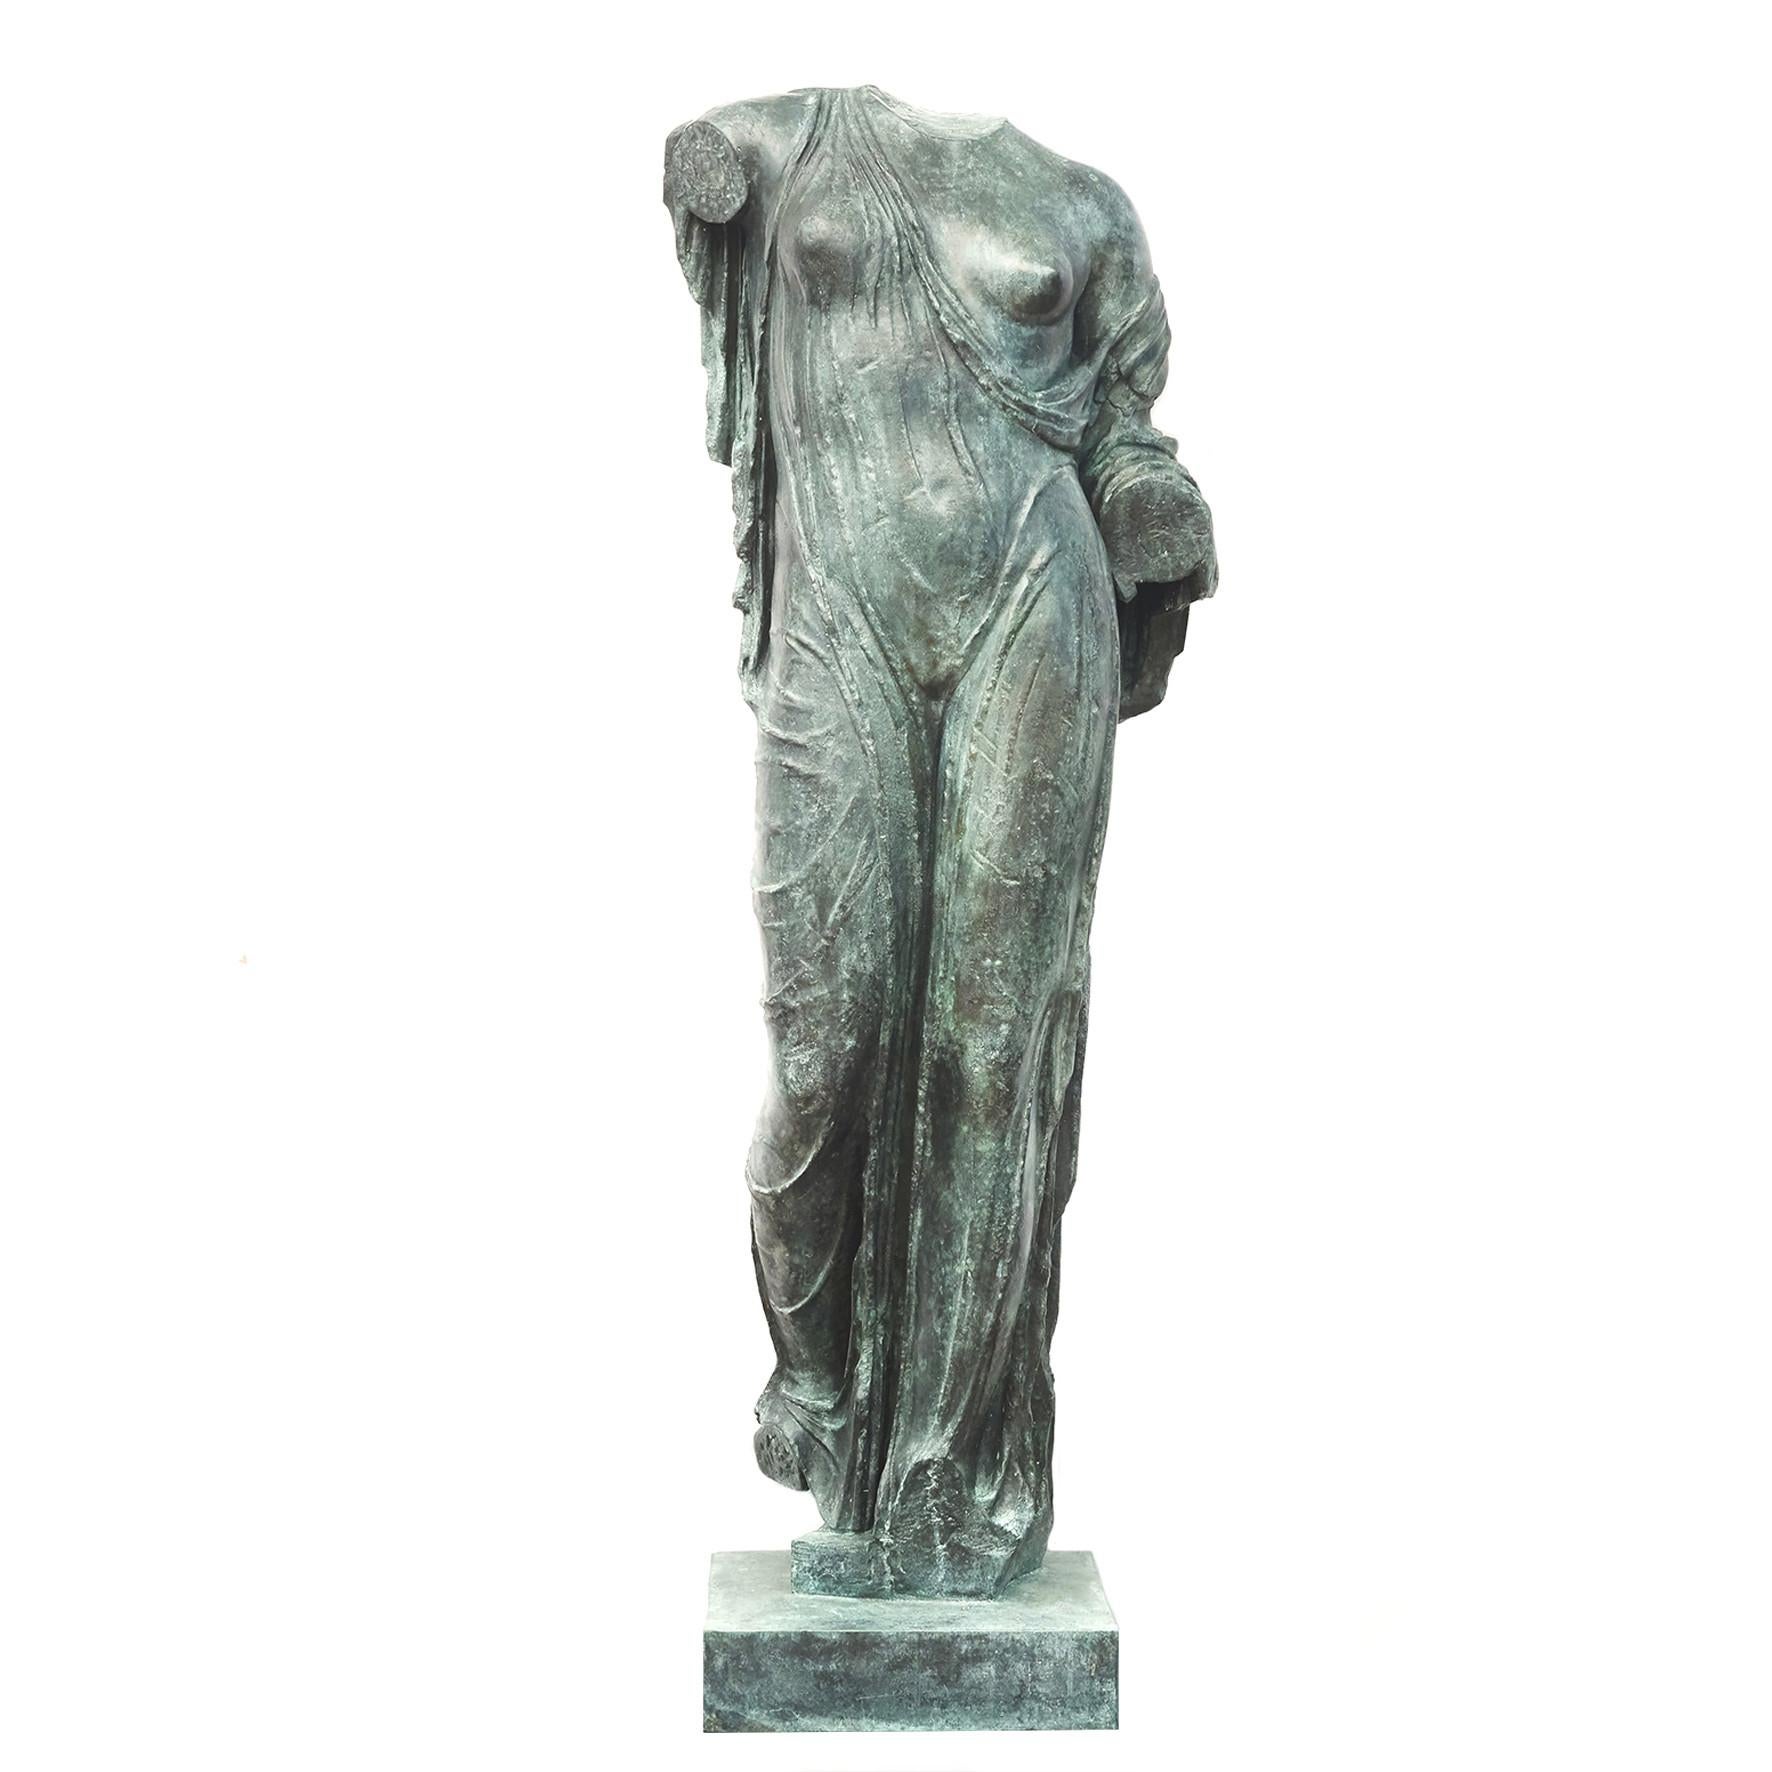 A copy cast in bronze in 2016 at the world famous Foundry, Fonderia Mariani, in Pietrasanta in Tuscany. 
The copy is based on a marble statue that since 1896 has been part of the antiquities collection at the Carlsberg Glyptotek in Copenhagen.